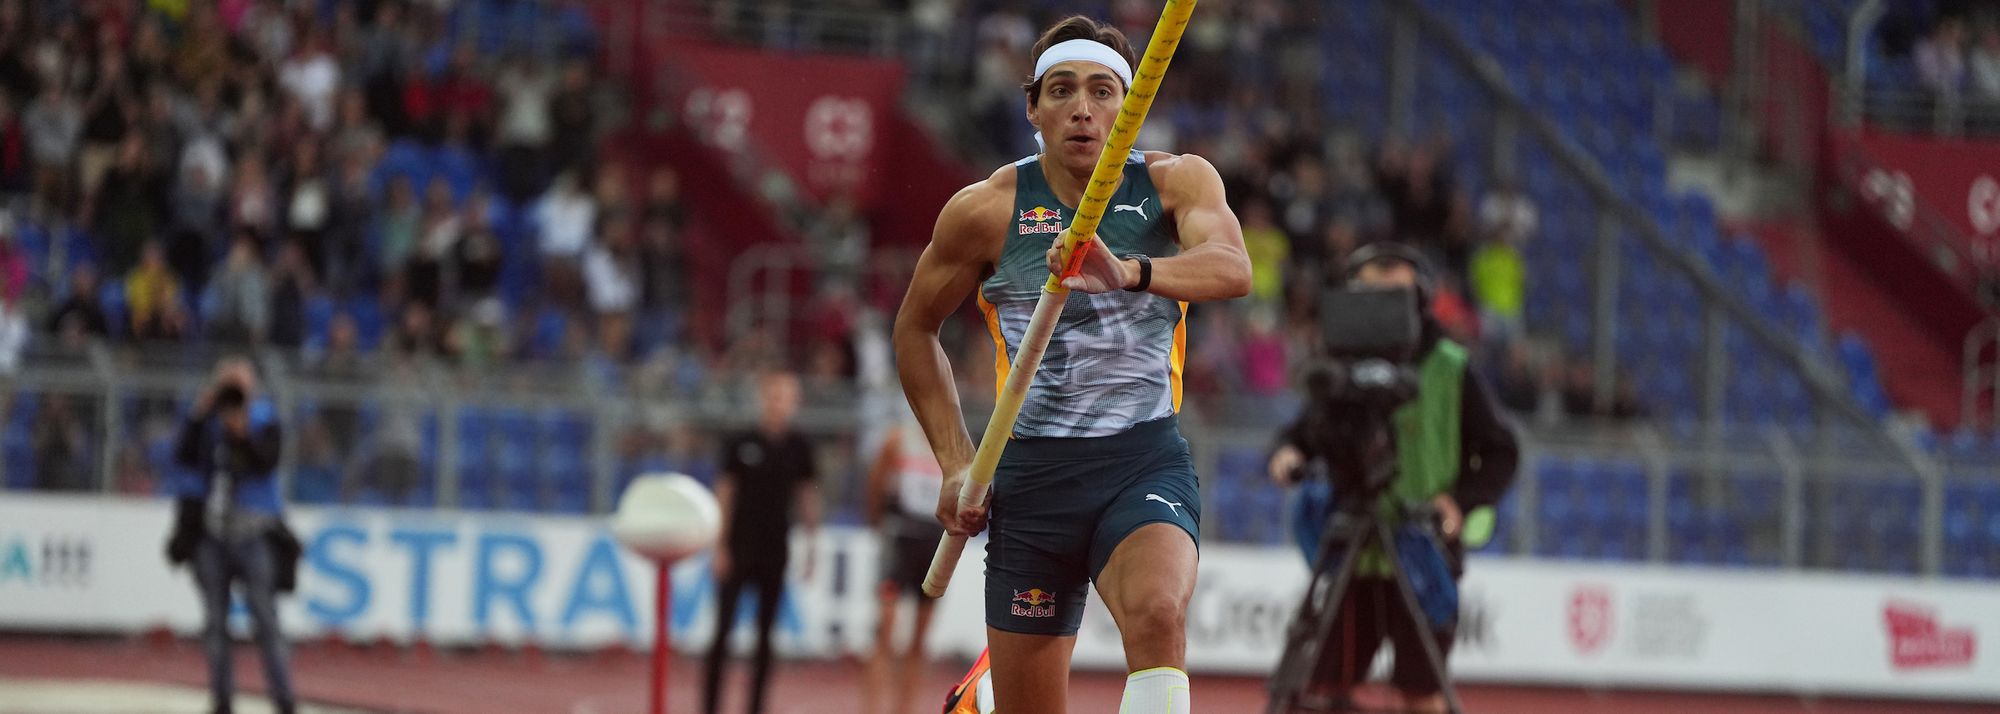 It might have been a blustery evening in Ostrava but that didn’t matter to Mondo Duplantis and Molly Caudery, who remained resolute to win their pole vault contests during the World Athletics Continental Tour Gold meeting